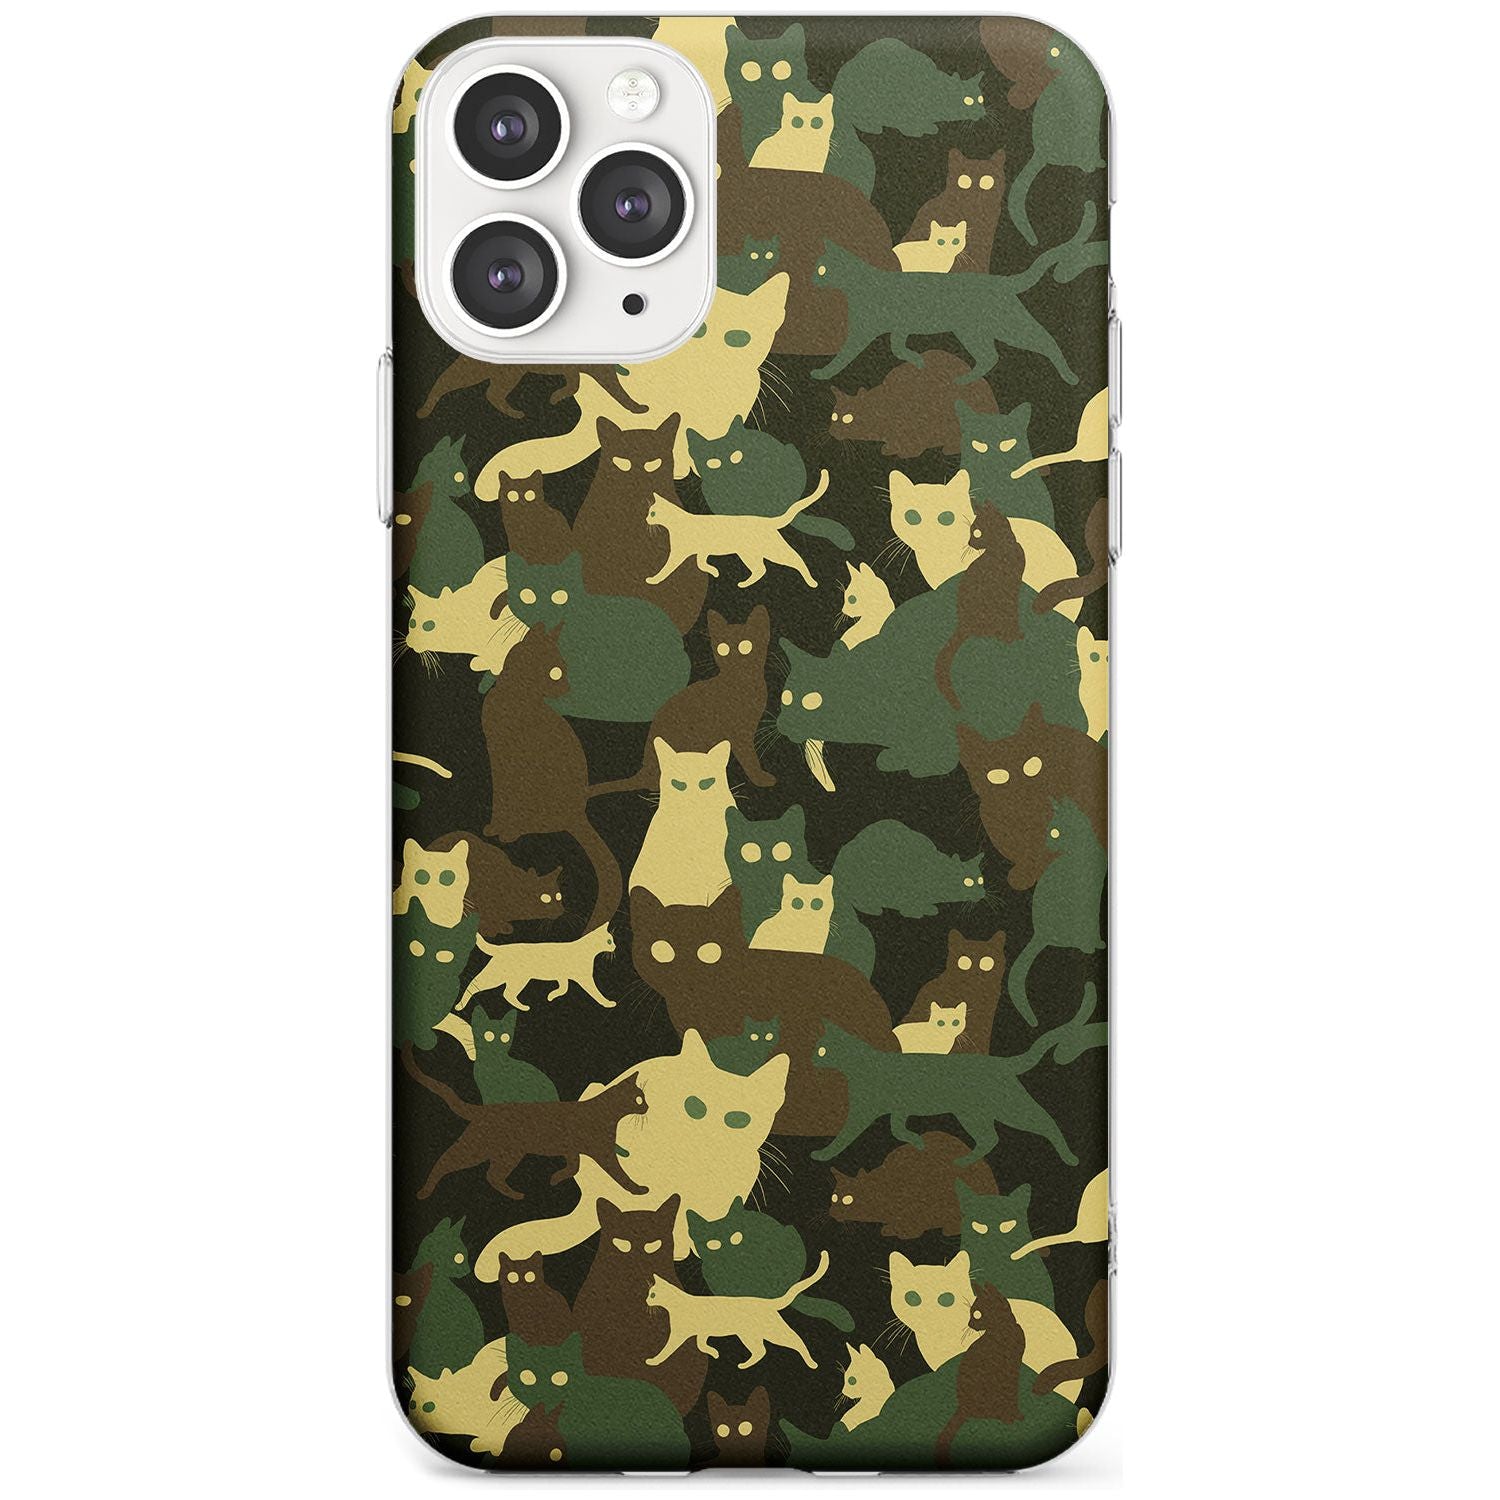 Forest Green Cat Camouflage Pattern Slim TPU Phone Case for iPhone 11 Pro Max